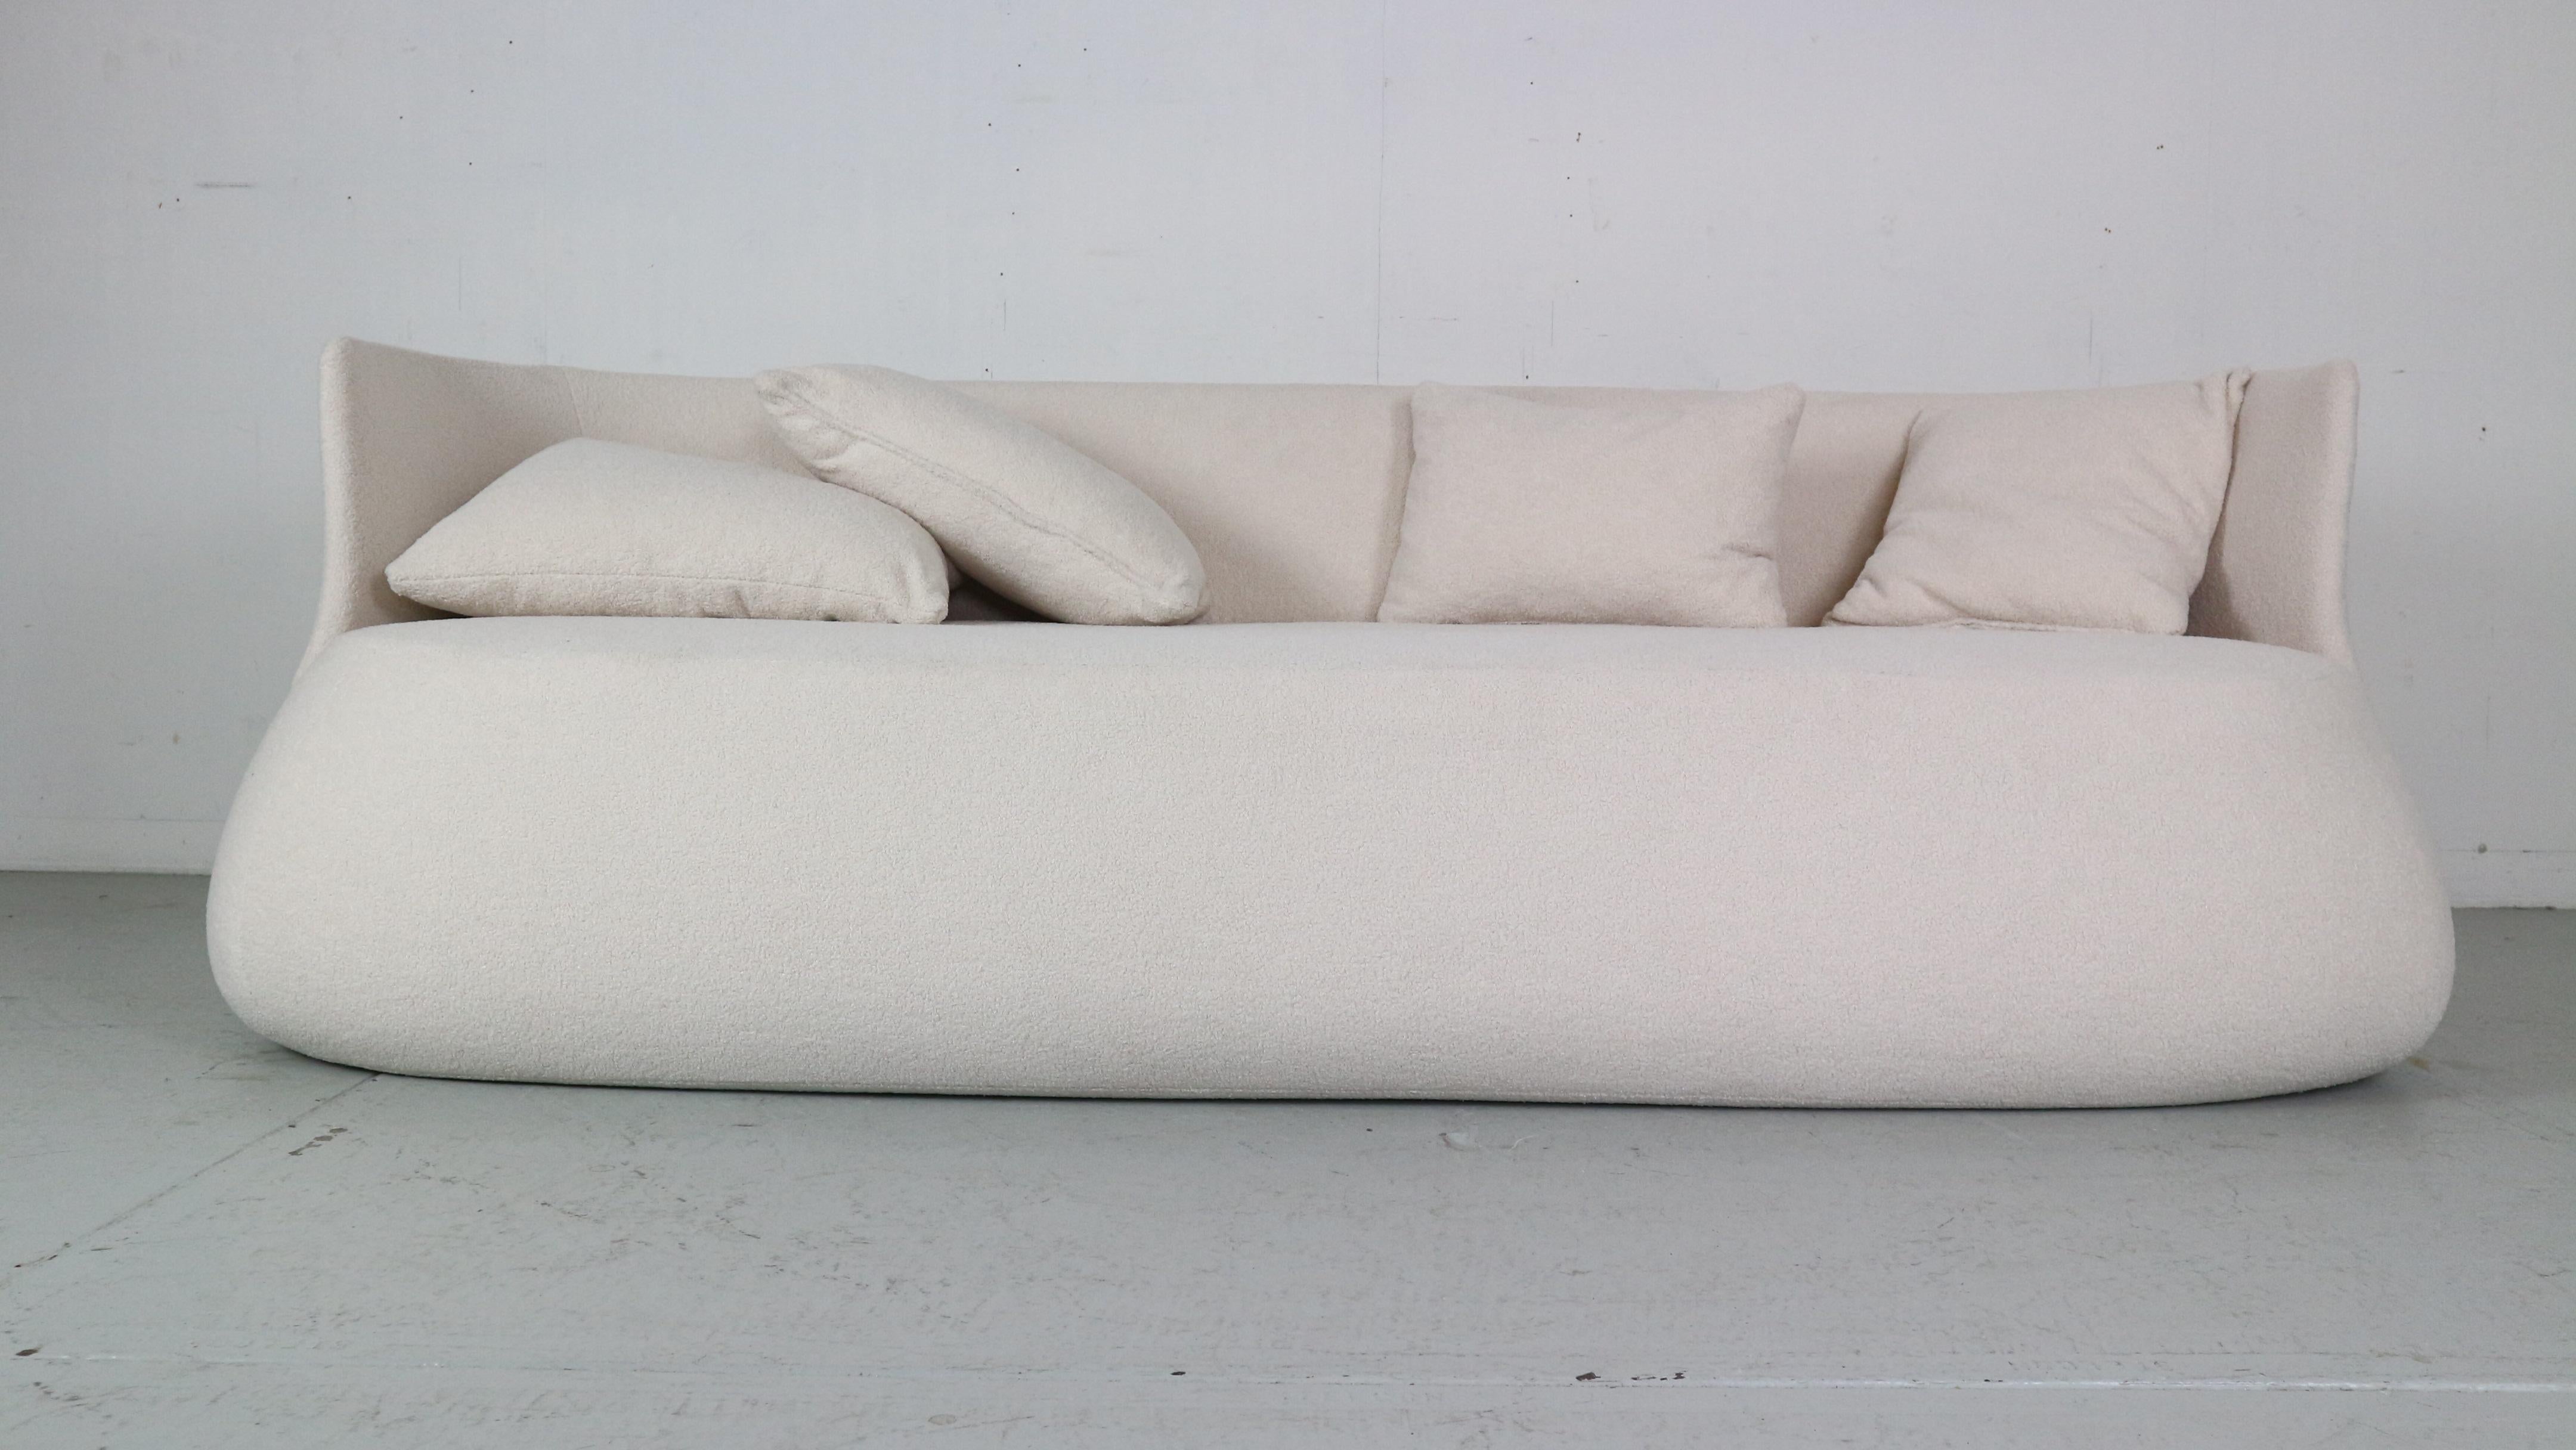 Beautifully designed and crafted sofa designed by Patricia Urquiola and manufactured for B&B Italia.

The 